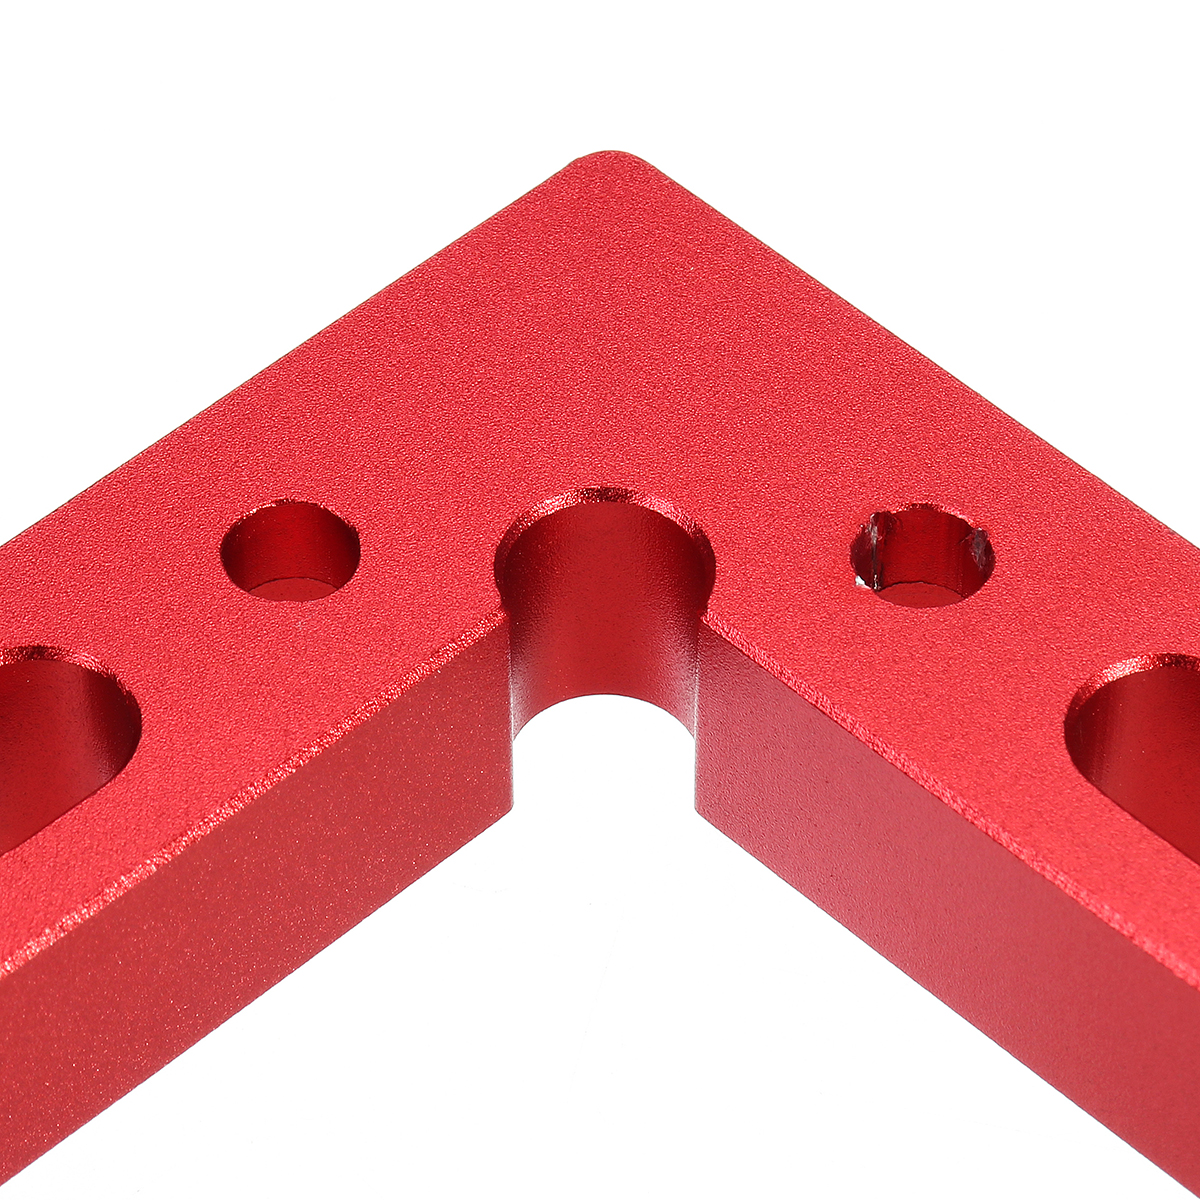 L-Shape-Clamp-90-Degree-Square-Right-Angle-Corner-Wood-Metal-Welding-Multifunctional-Tools-1543730-8